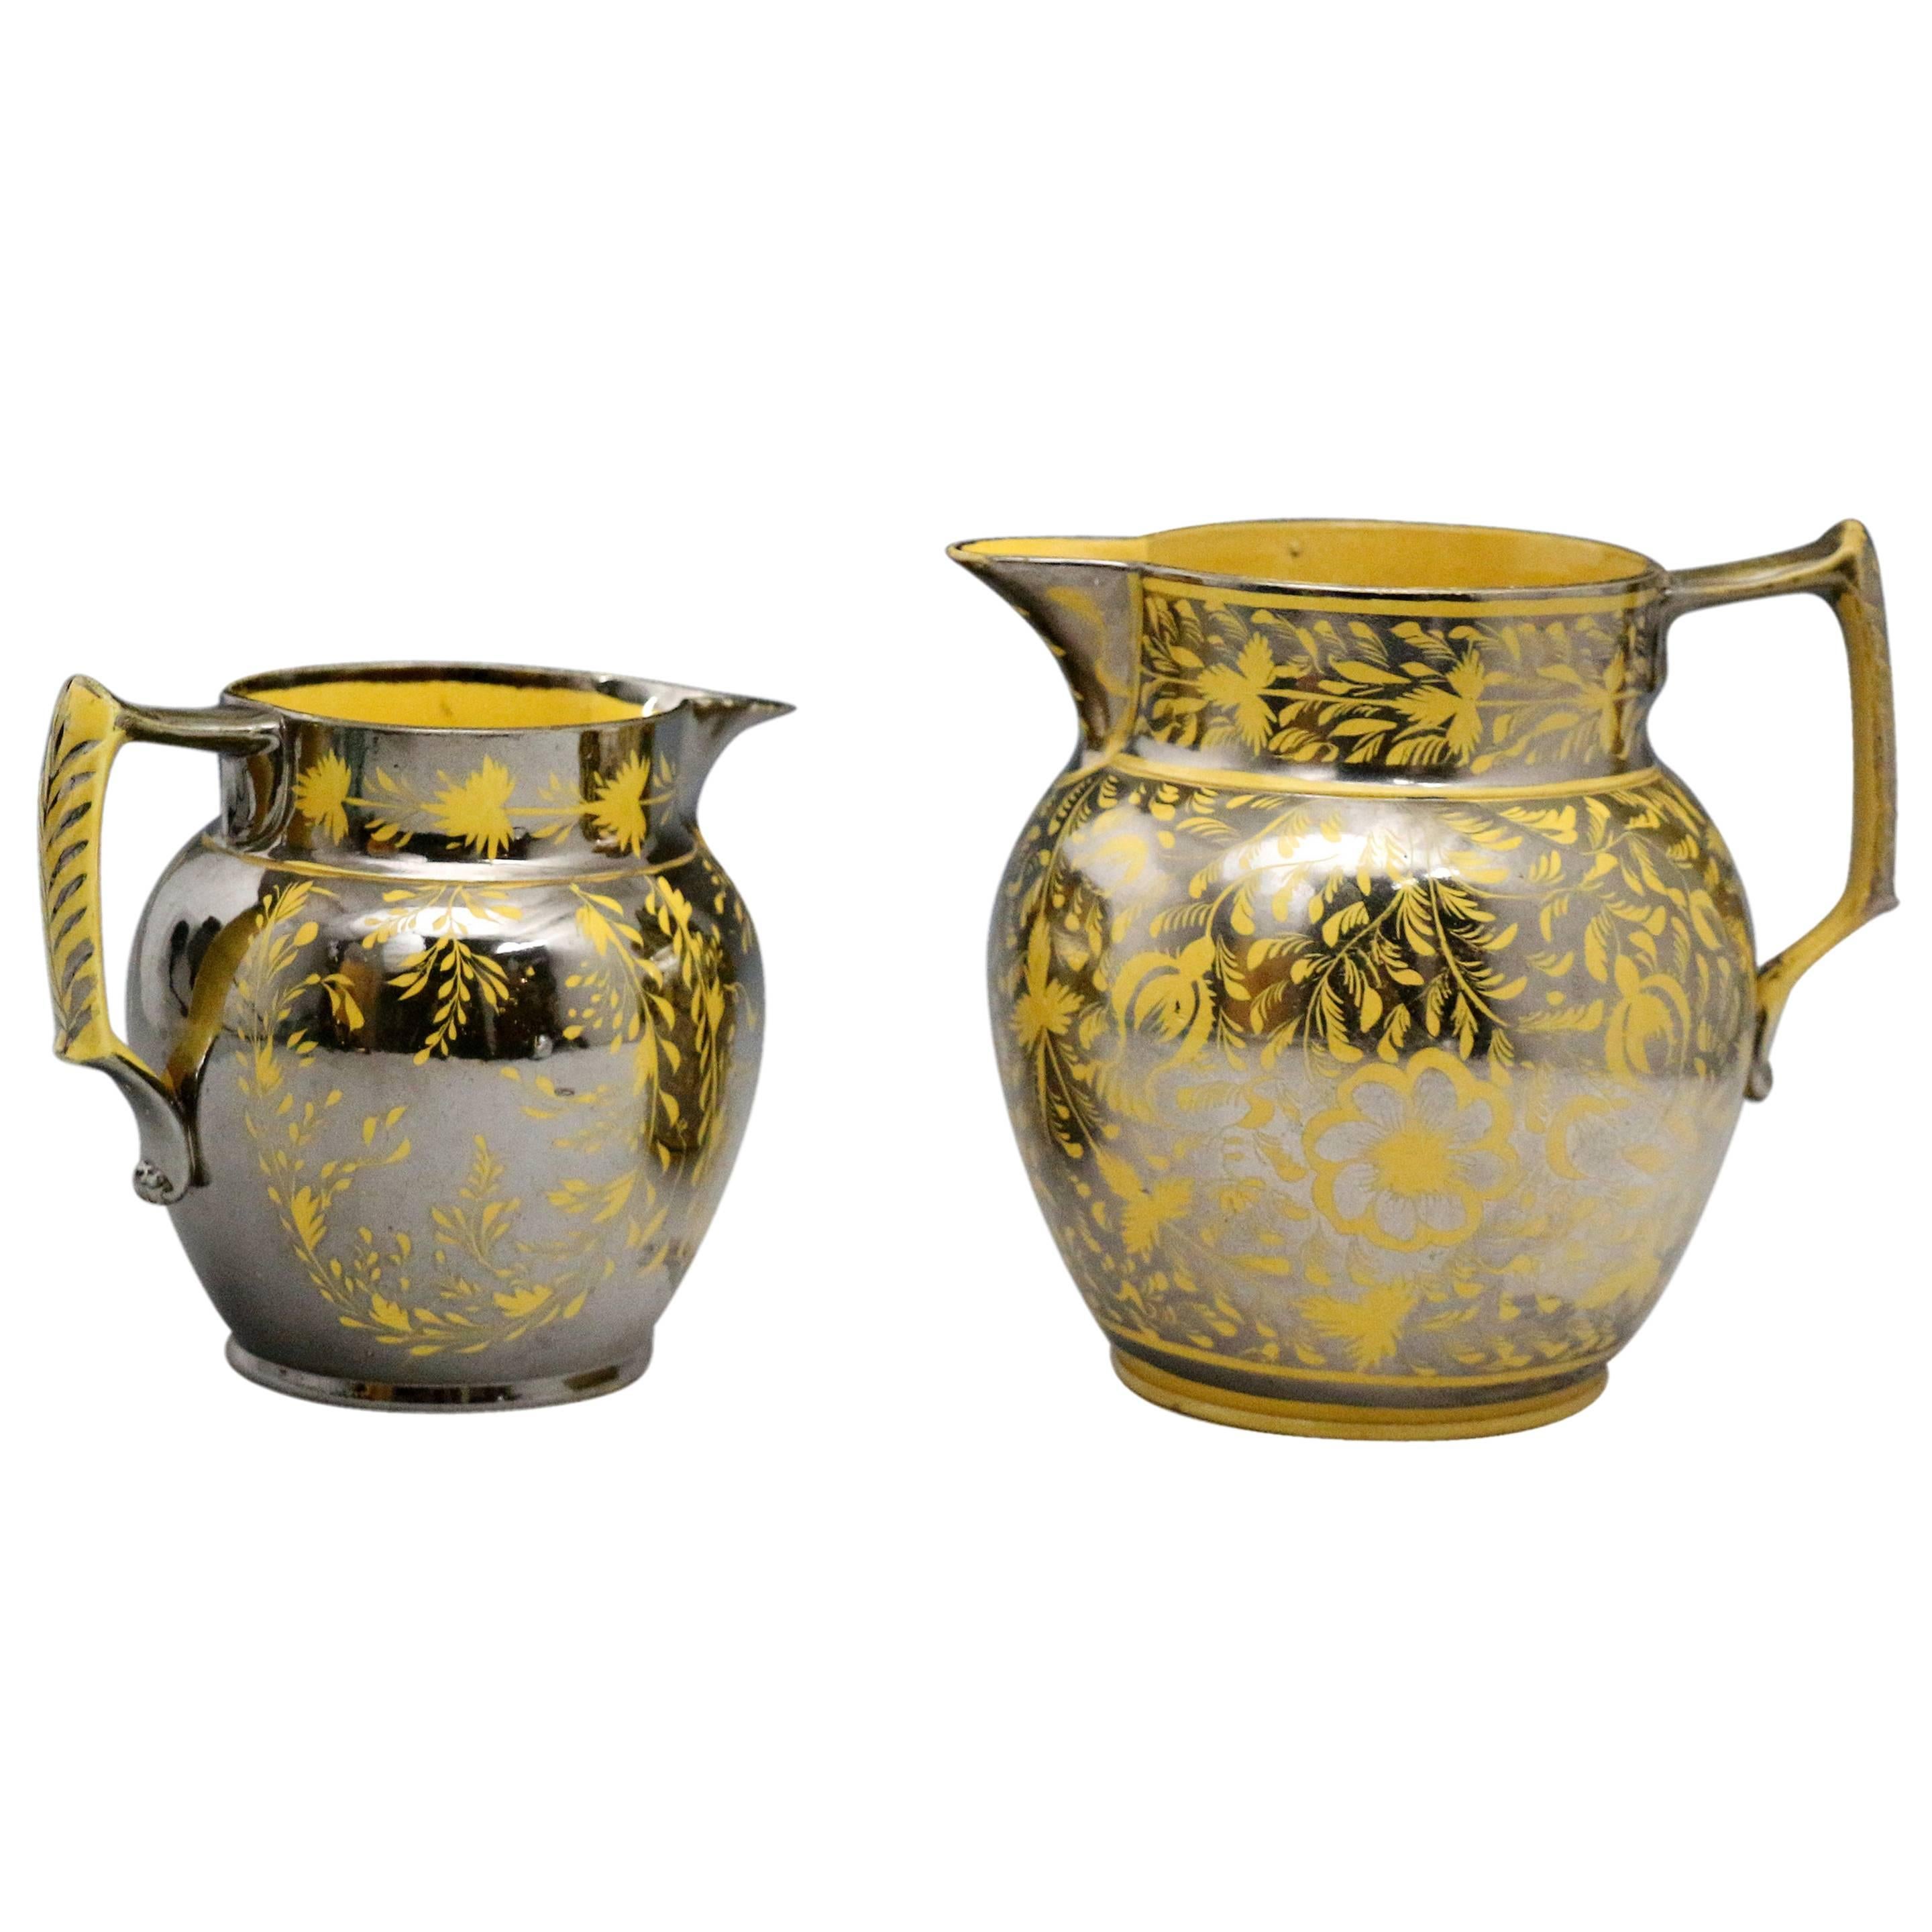 English Pottery Yellow Ground Pitcher with Silver Luster Resist Decoartion Early